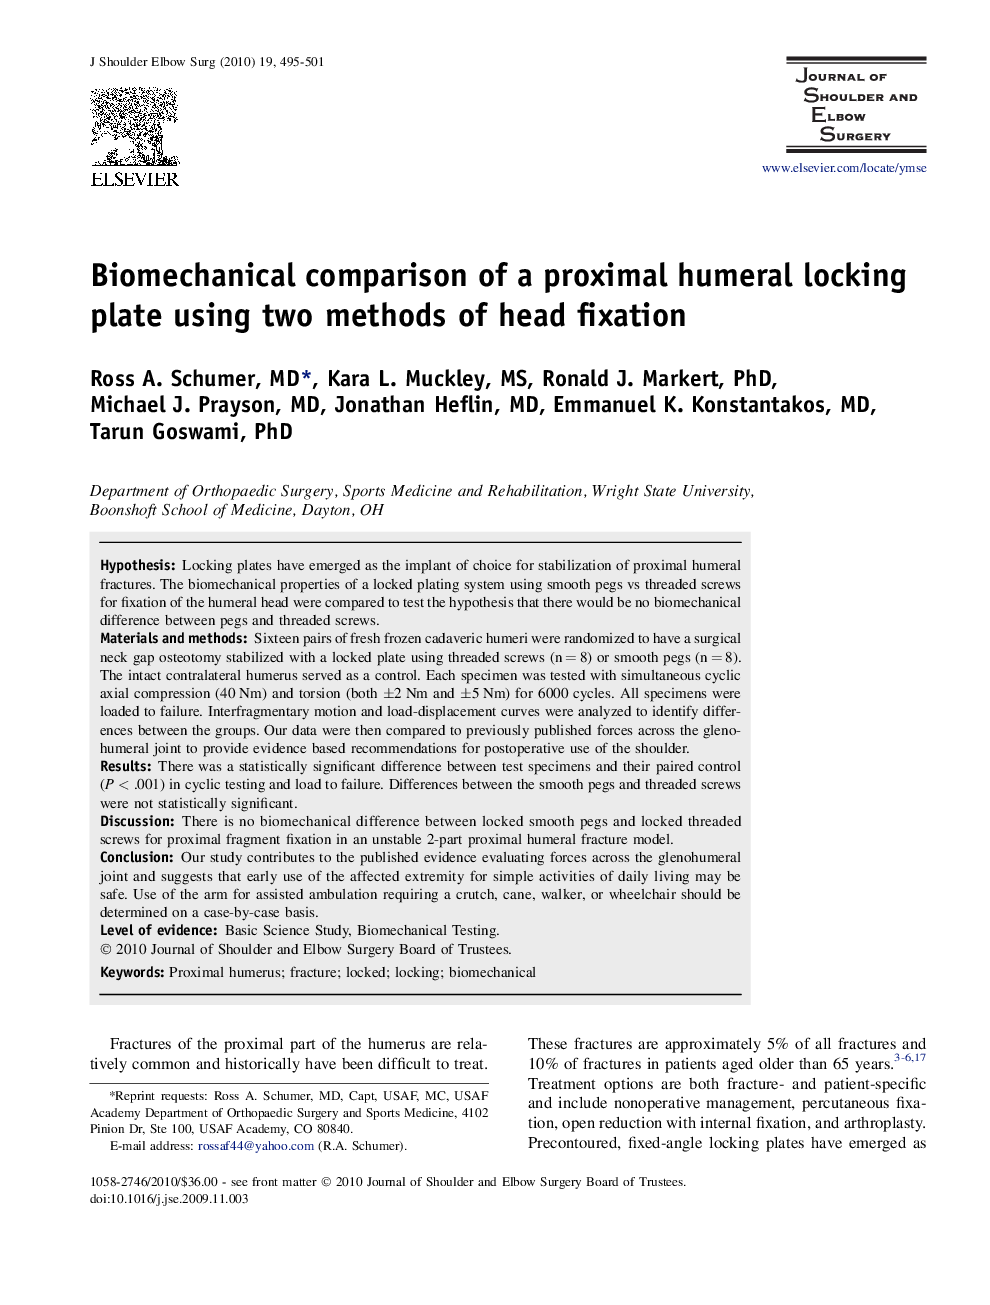 Biomechanical comparison of a proximal humeral locking plate using two methods of head fixation